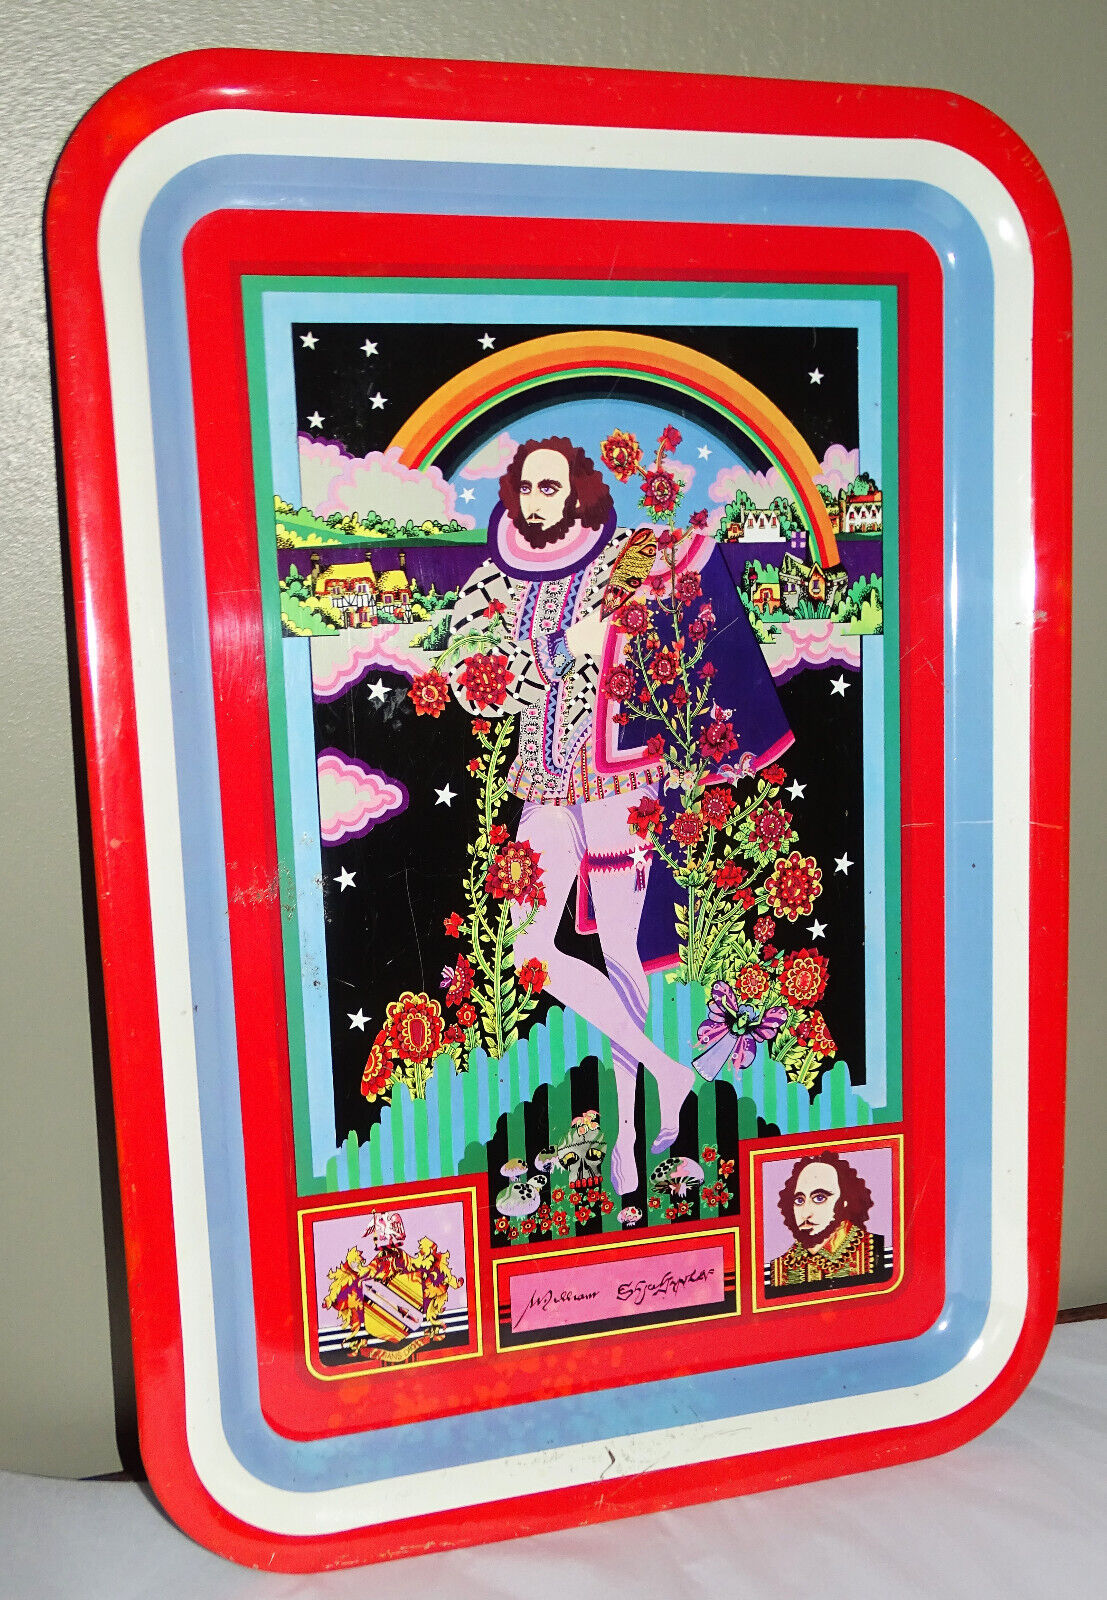 Vtg Shakespeare English Pop Art Serving Tray By Polypops Signed 1960 1970s 14x20